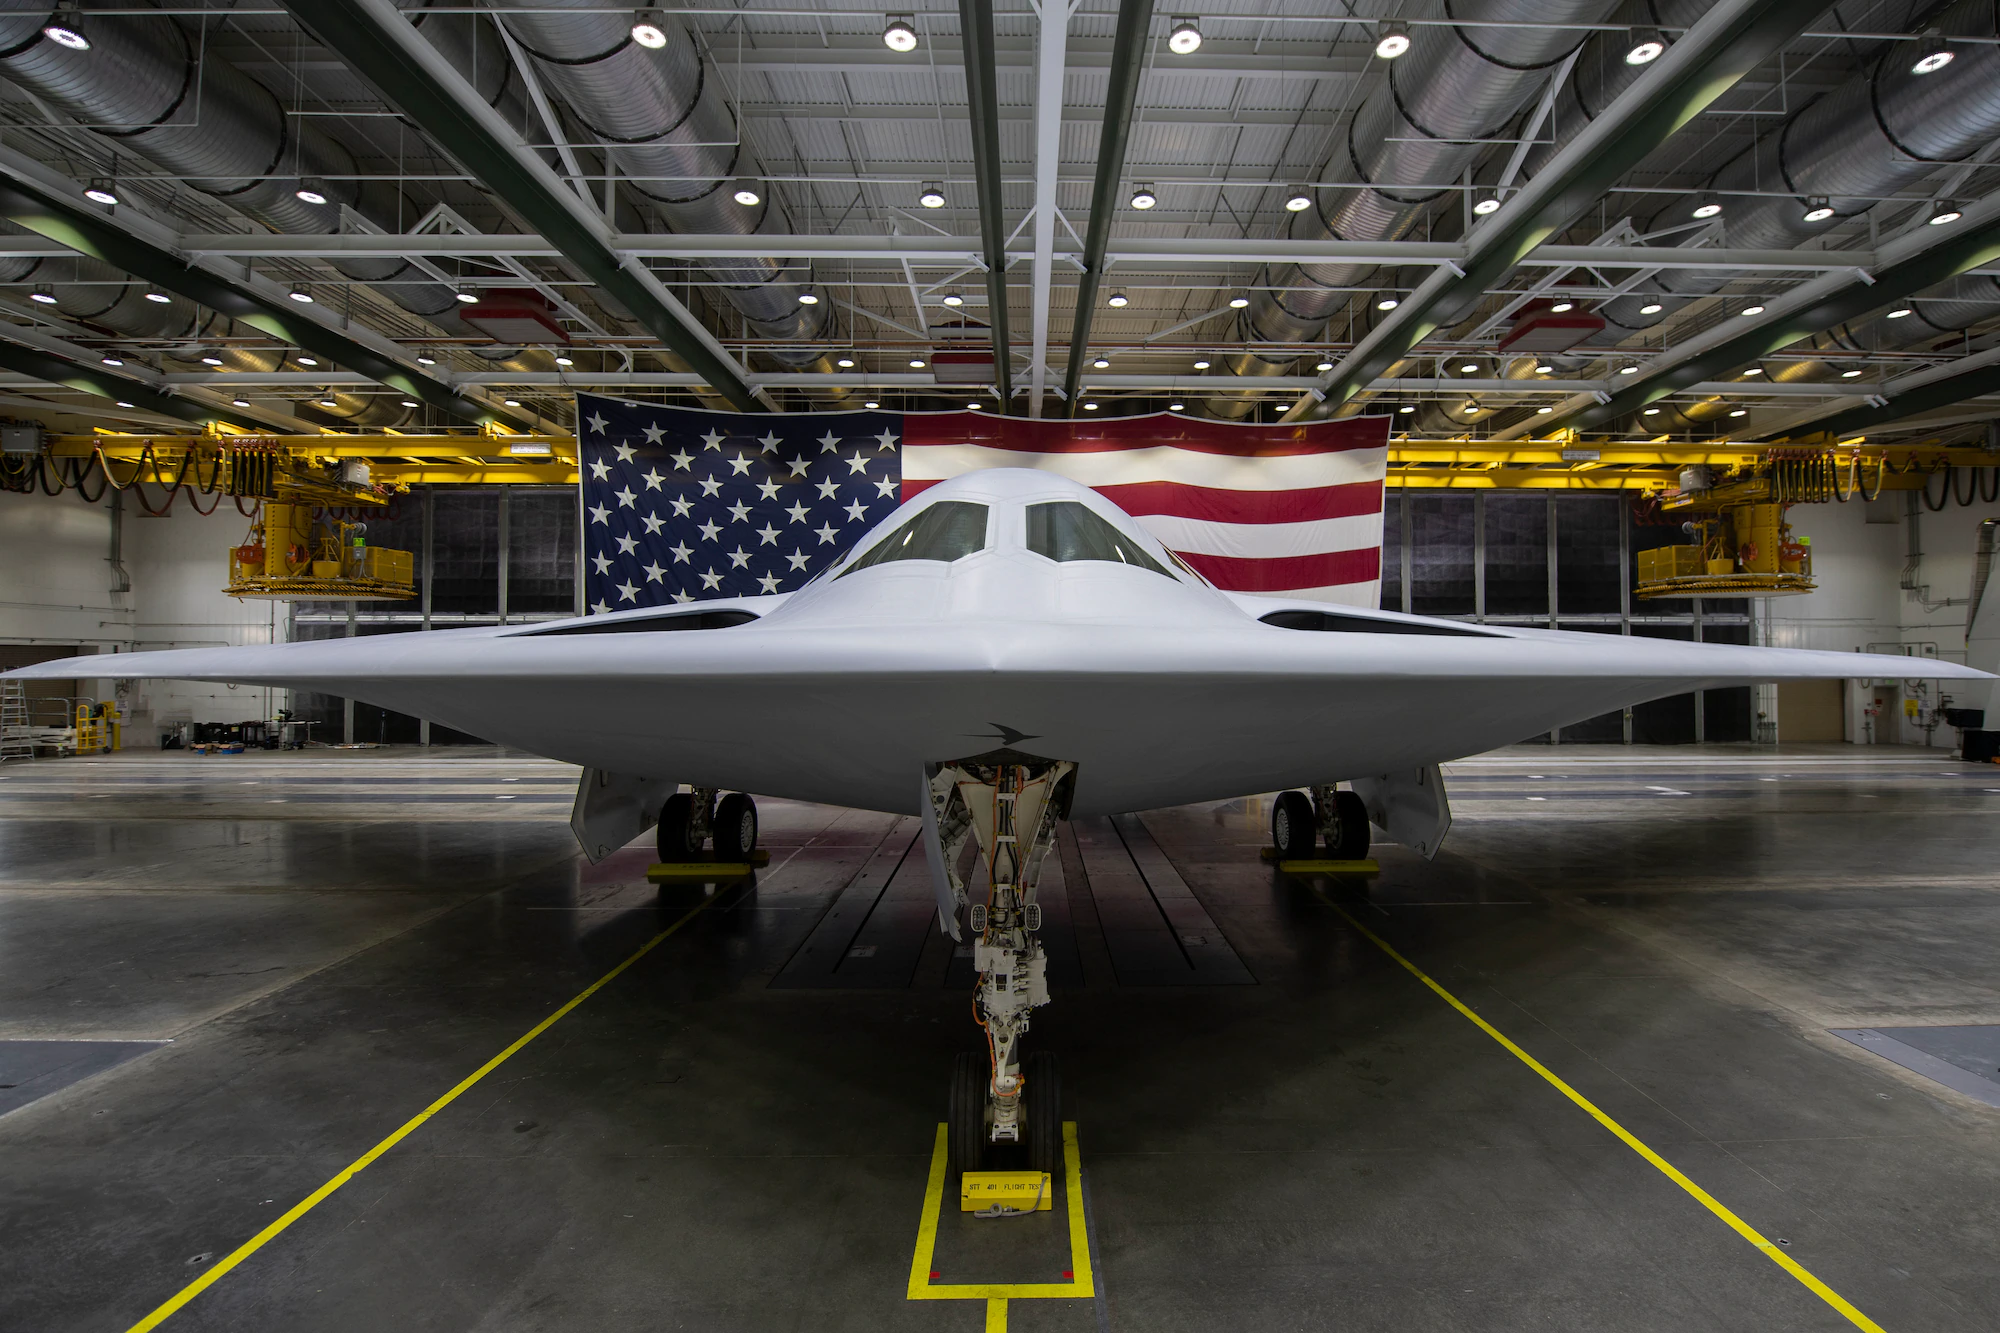 Australia has decided not to buy B-21 Raider nuclear bombers - 12 planes could cost $28bn